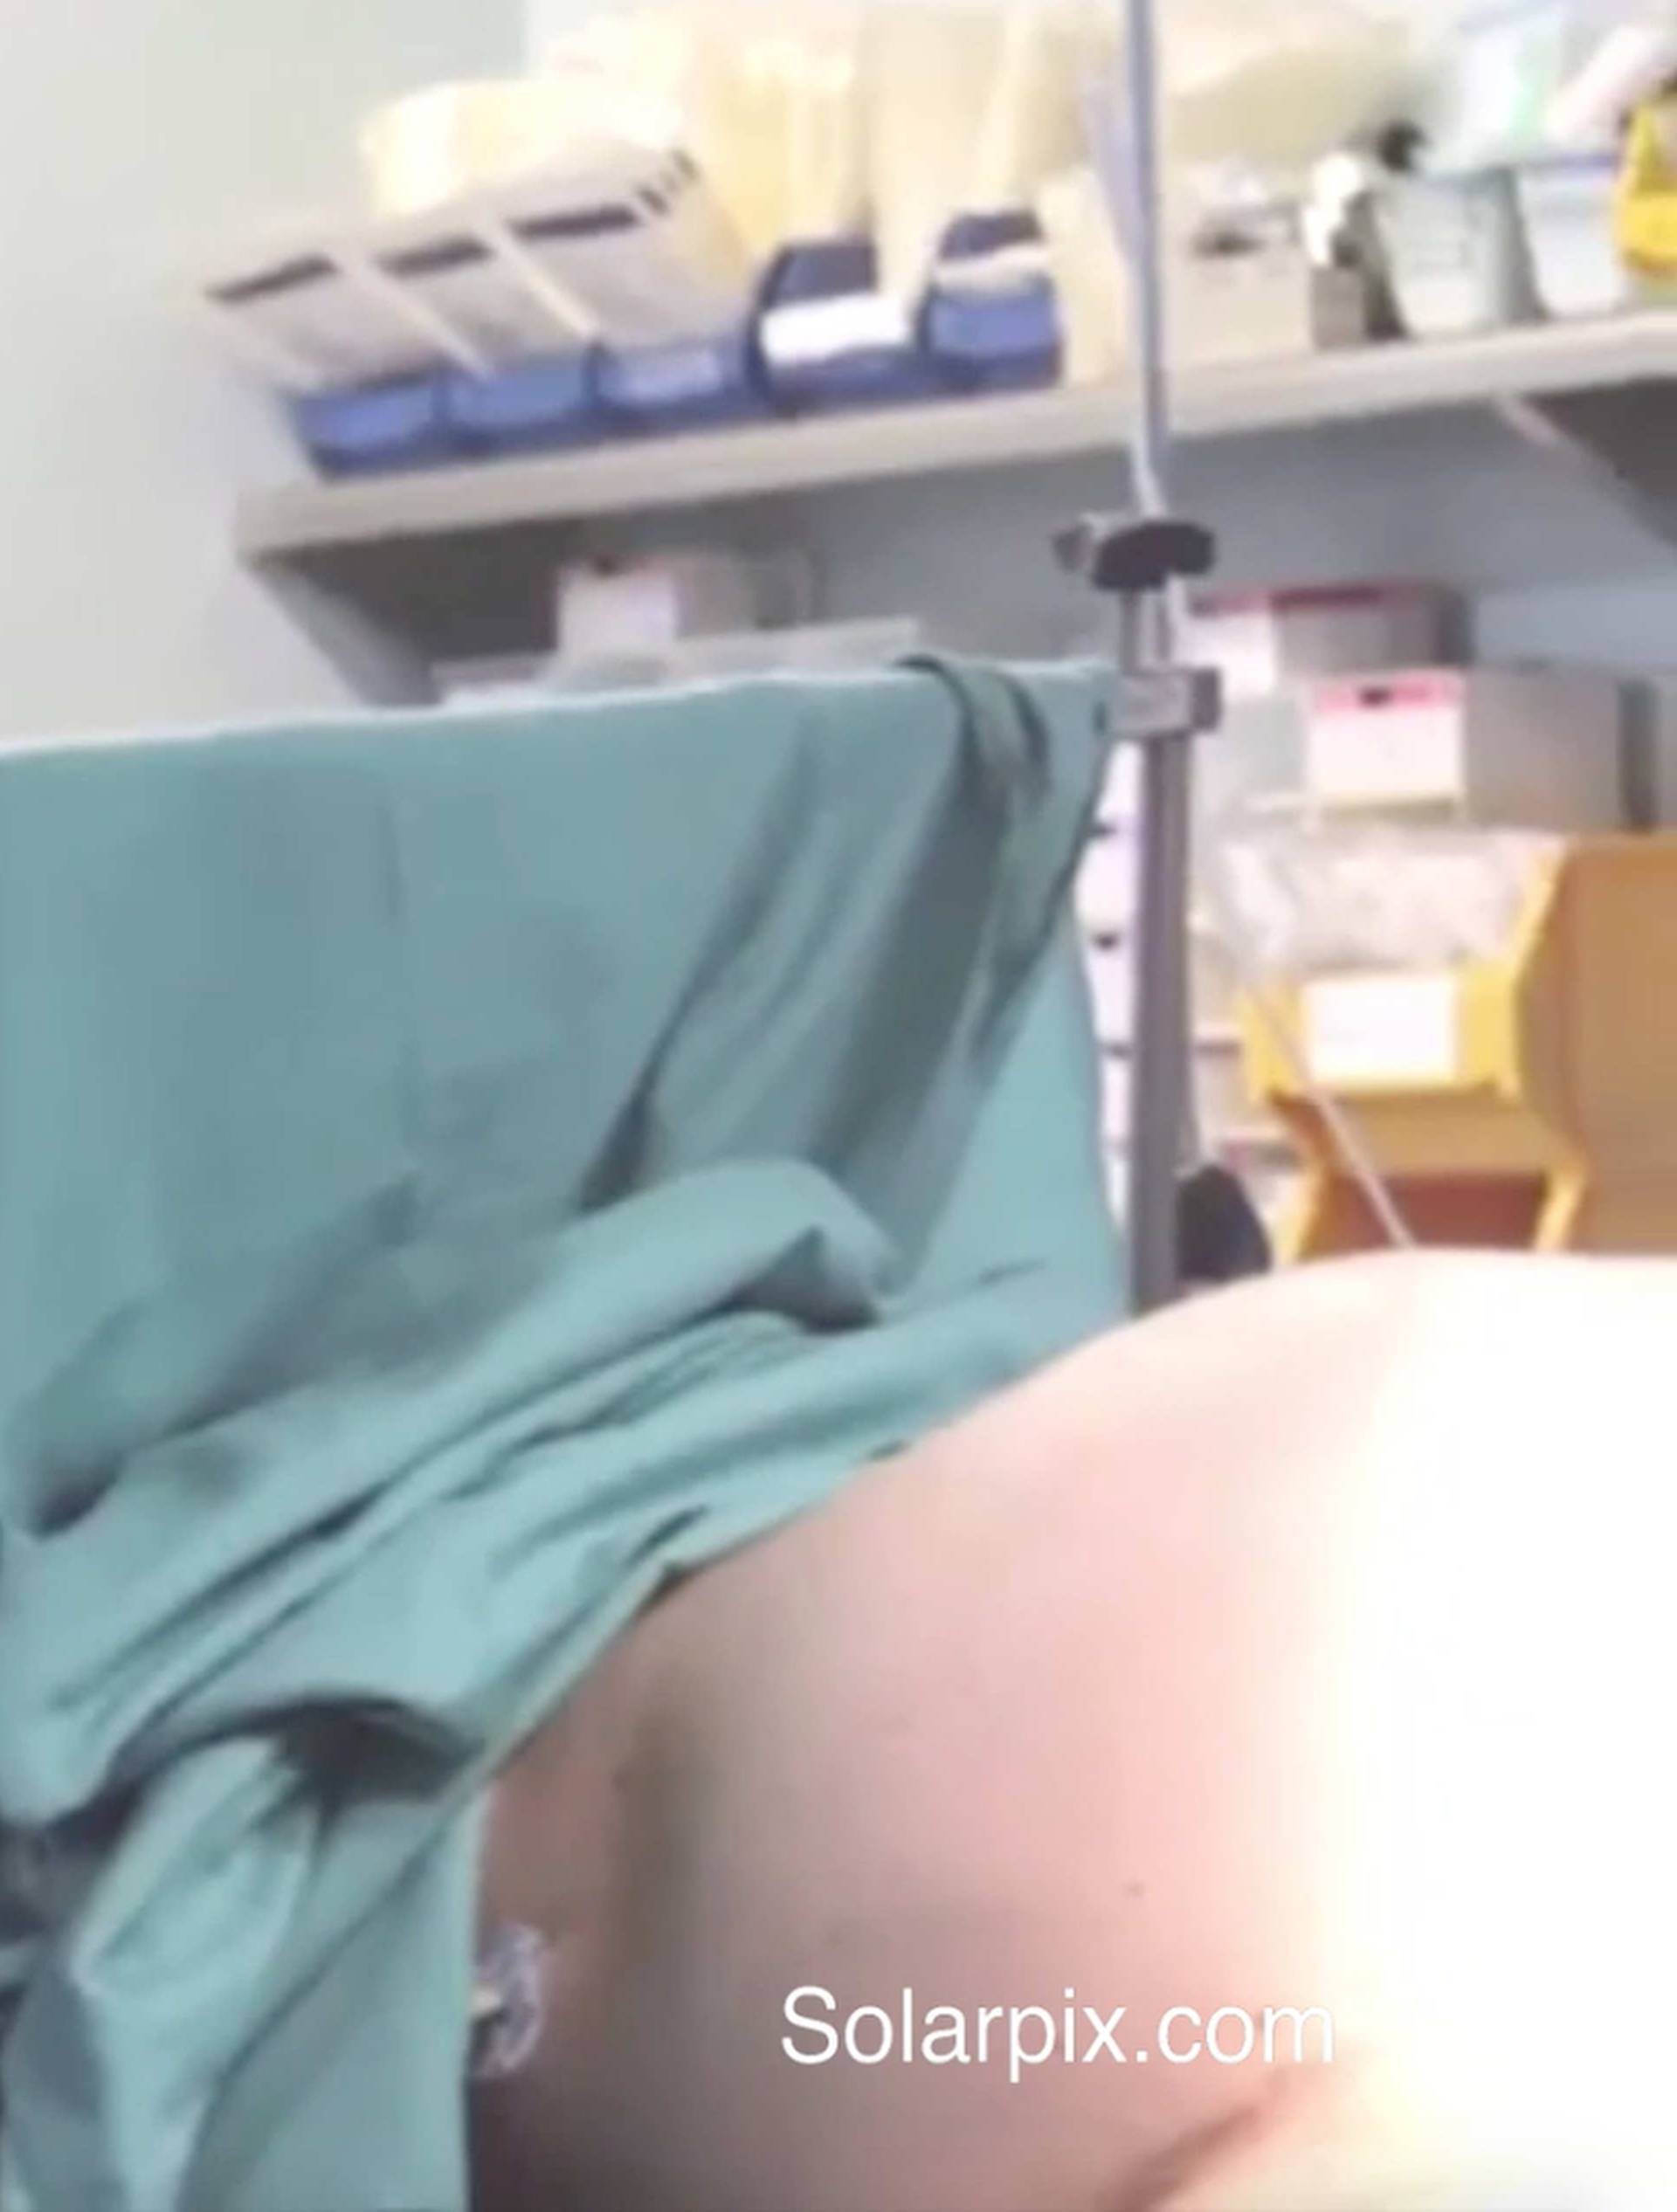 A 64-YEAR-old woman has given birth to twins at a hospital in Spain.The OAP became Spainâs second oldest mum ever after a Caesarian section at a hospital in the northern city of Burgos yesterday afternoon/on Tuesday afternoon.Â